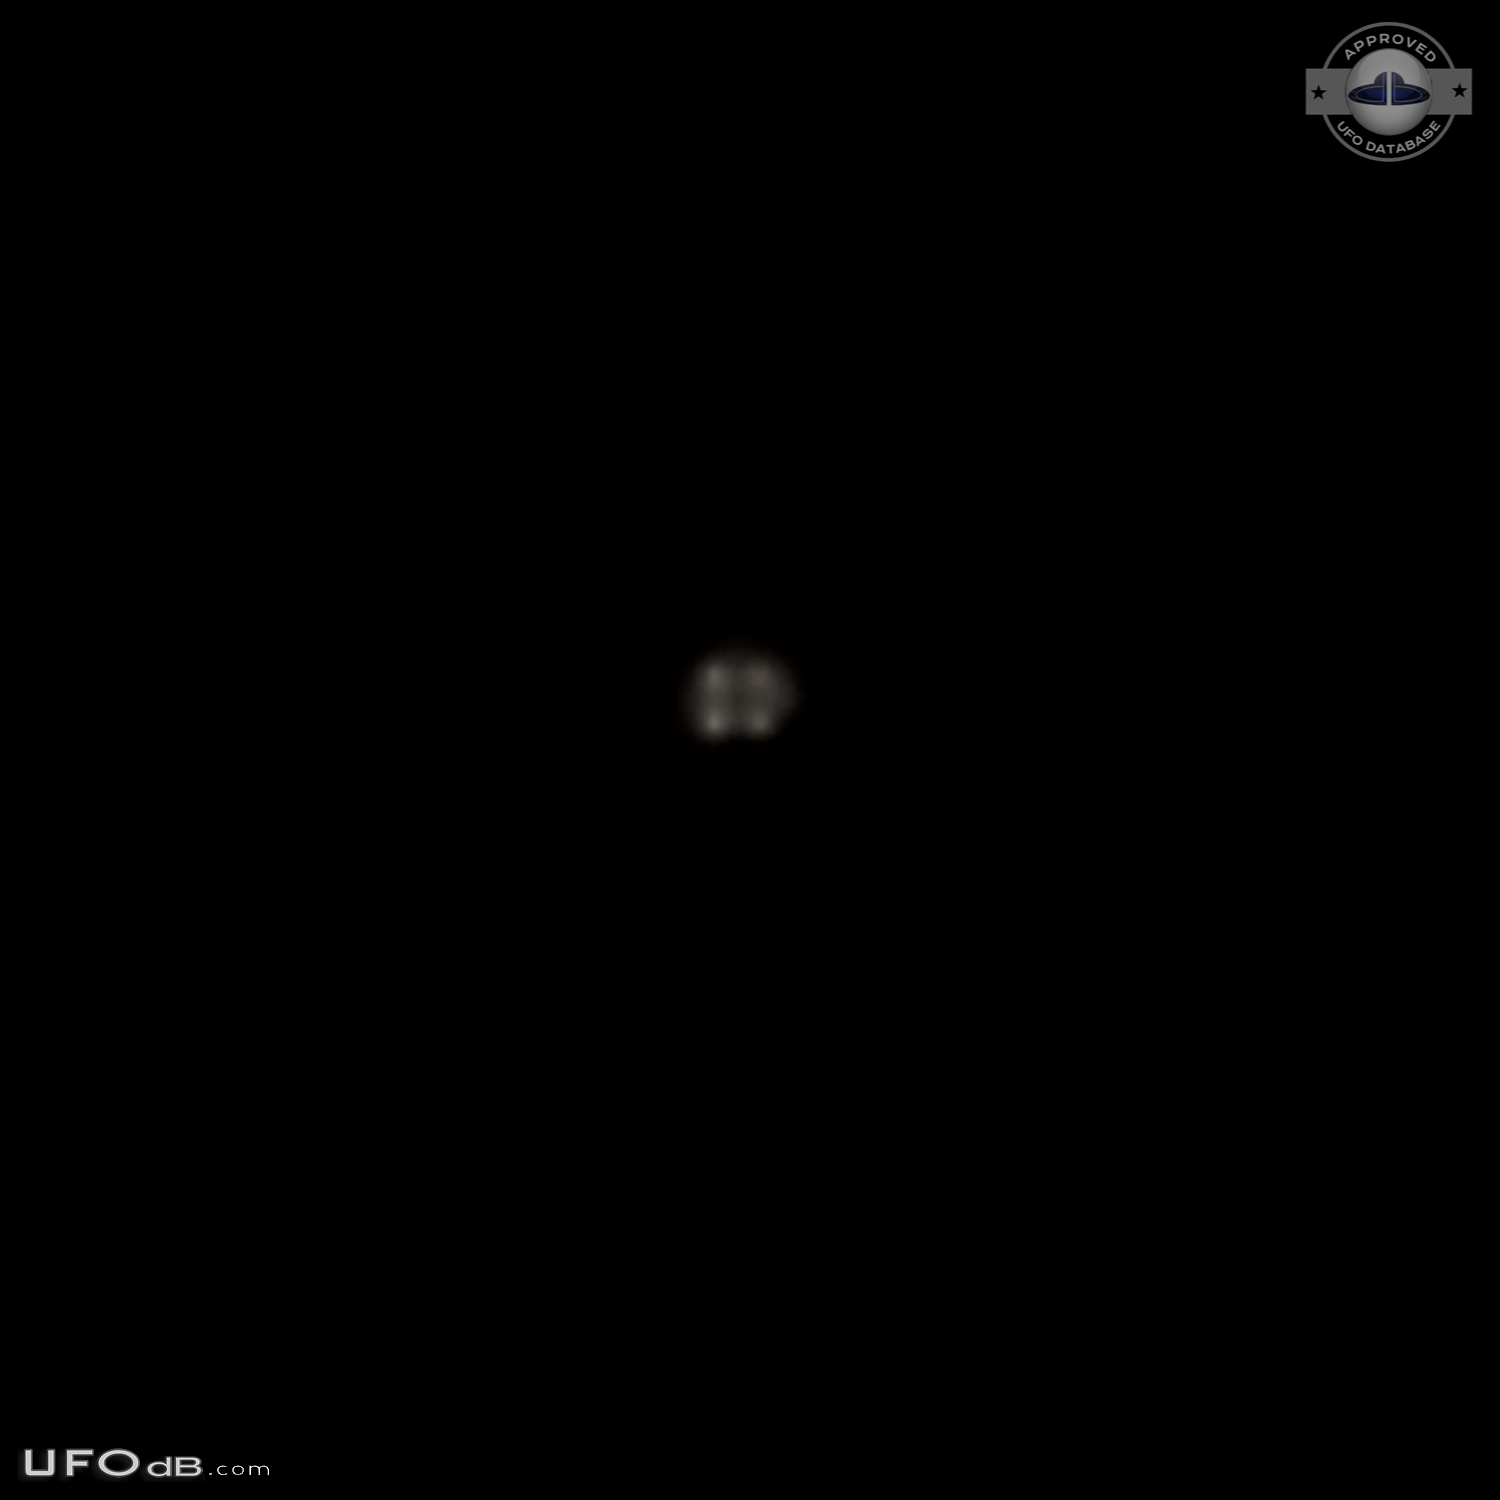 Square UFO with four thrusters fast shiny Hyderabad Telangana India UFO Picture #656-2